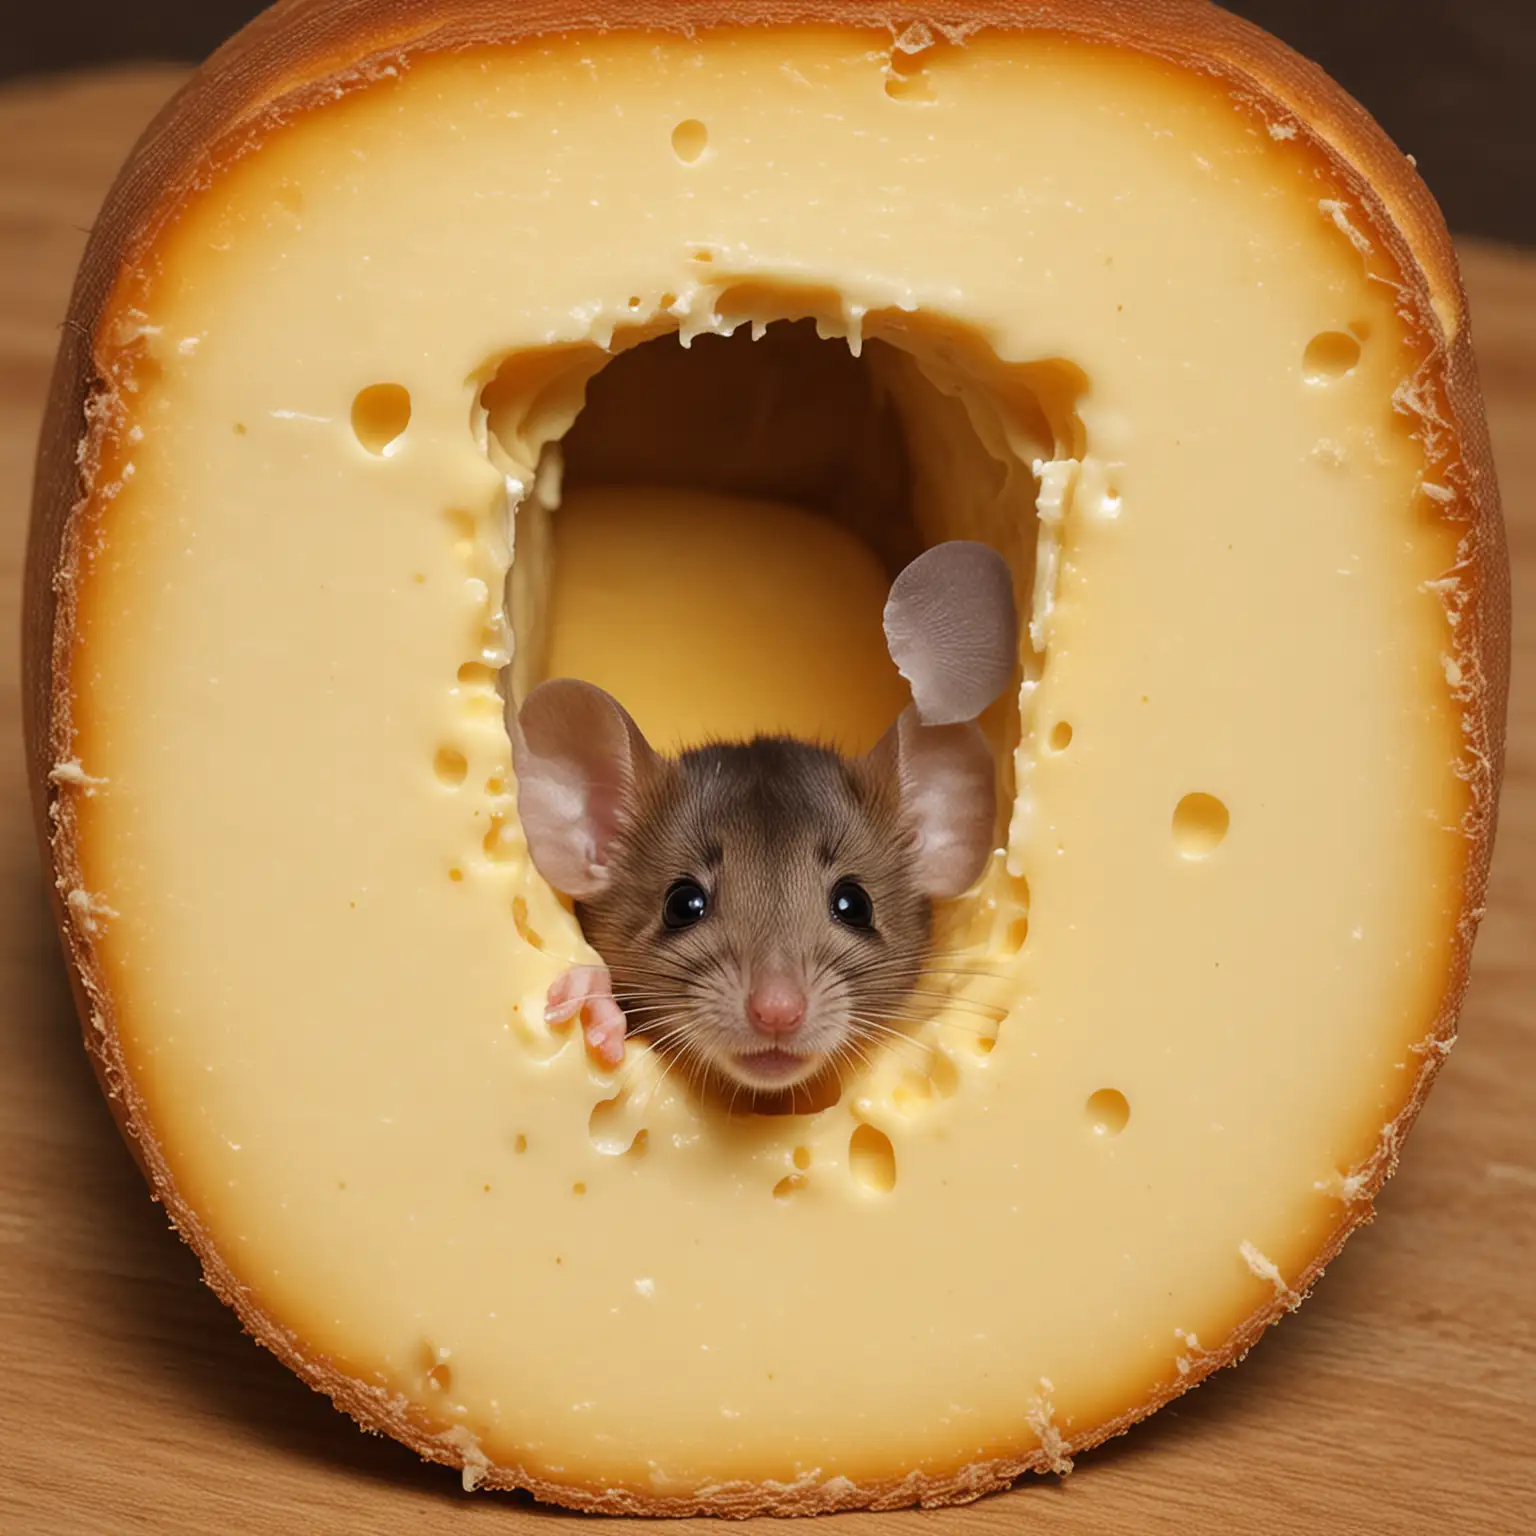 Curious Mouse Gazing at Nostalgic Cheese Center Hole